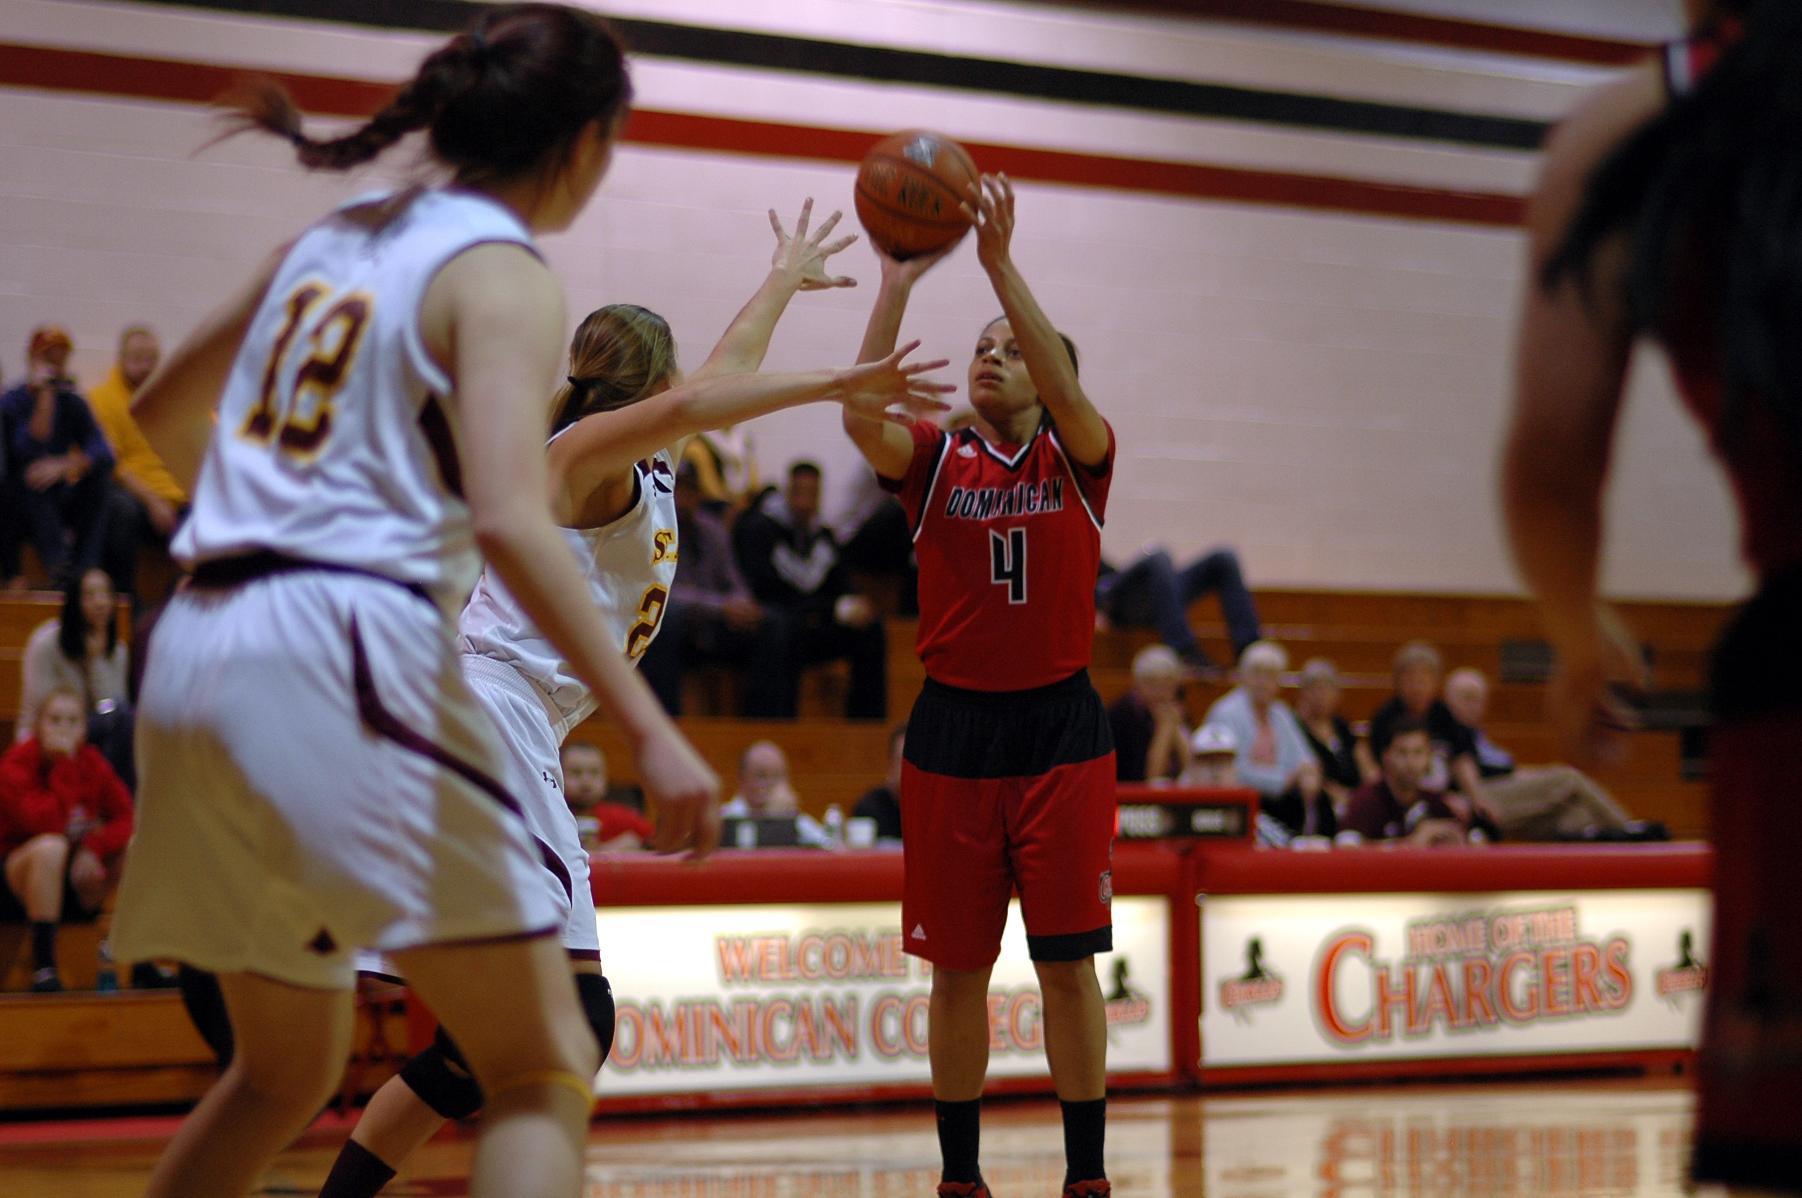 DEVILS RALLY TO EDGE LADY CHARGERS